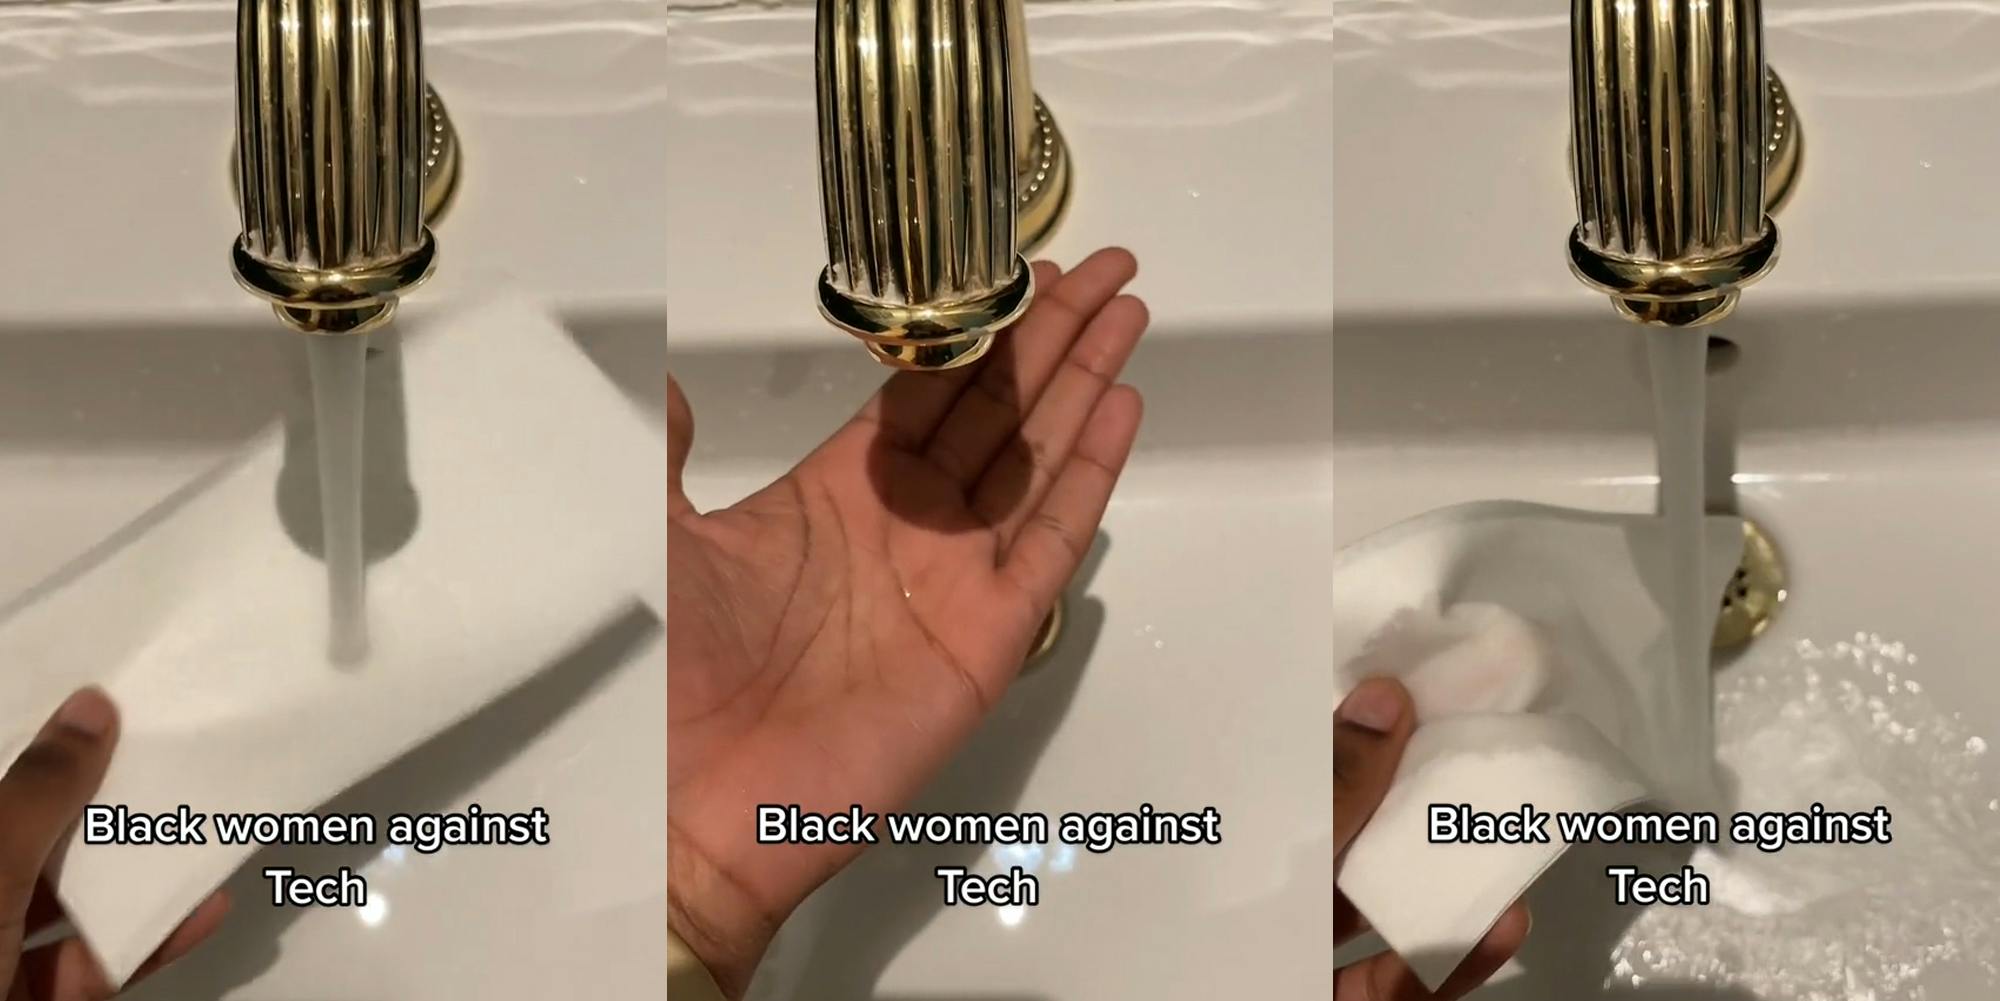 woman putting white napkin under automatic sink making water run with caption "Black women against Tech" (l) woman putting hand automatic sink which isn't making the making water run with caption "Black women against Tech" (c) woman putting white napkin under automatic sink making water run with caption "Black women against Tech" (r)